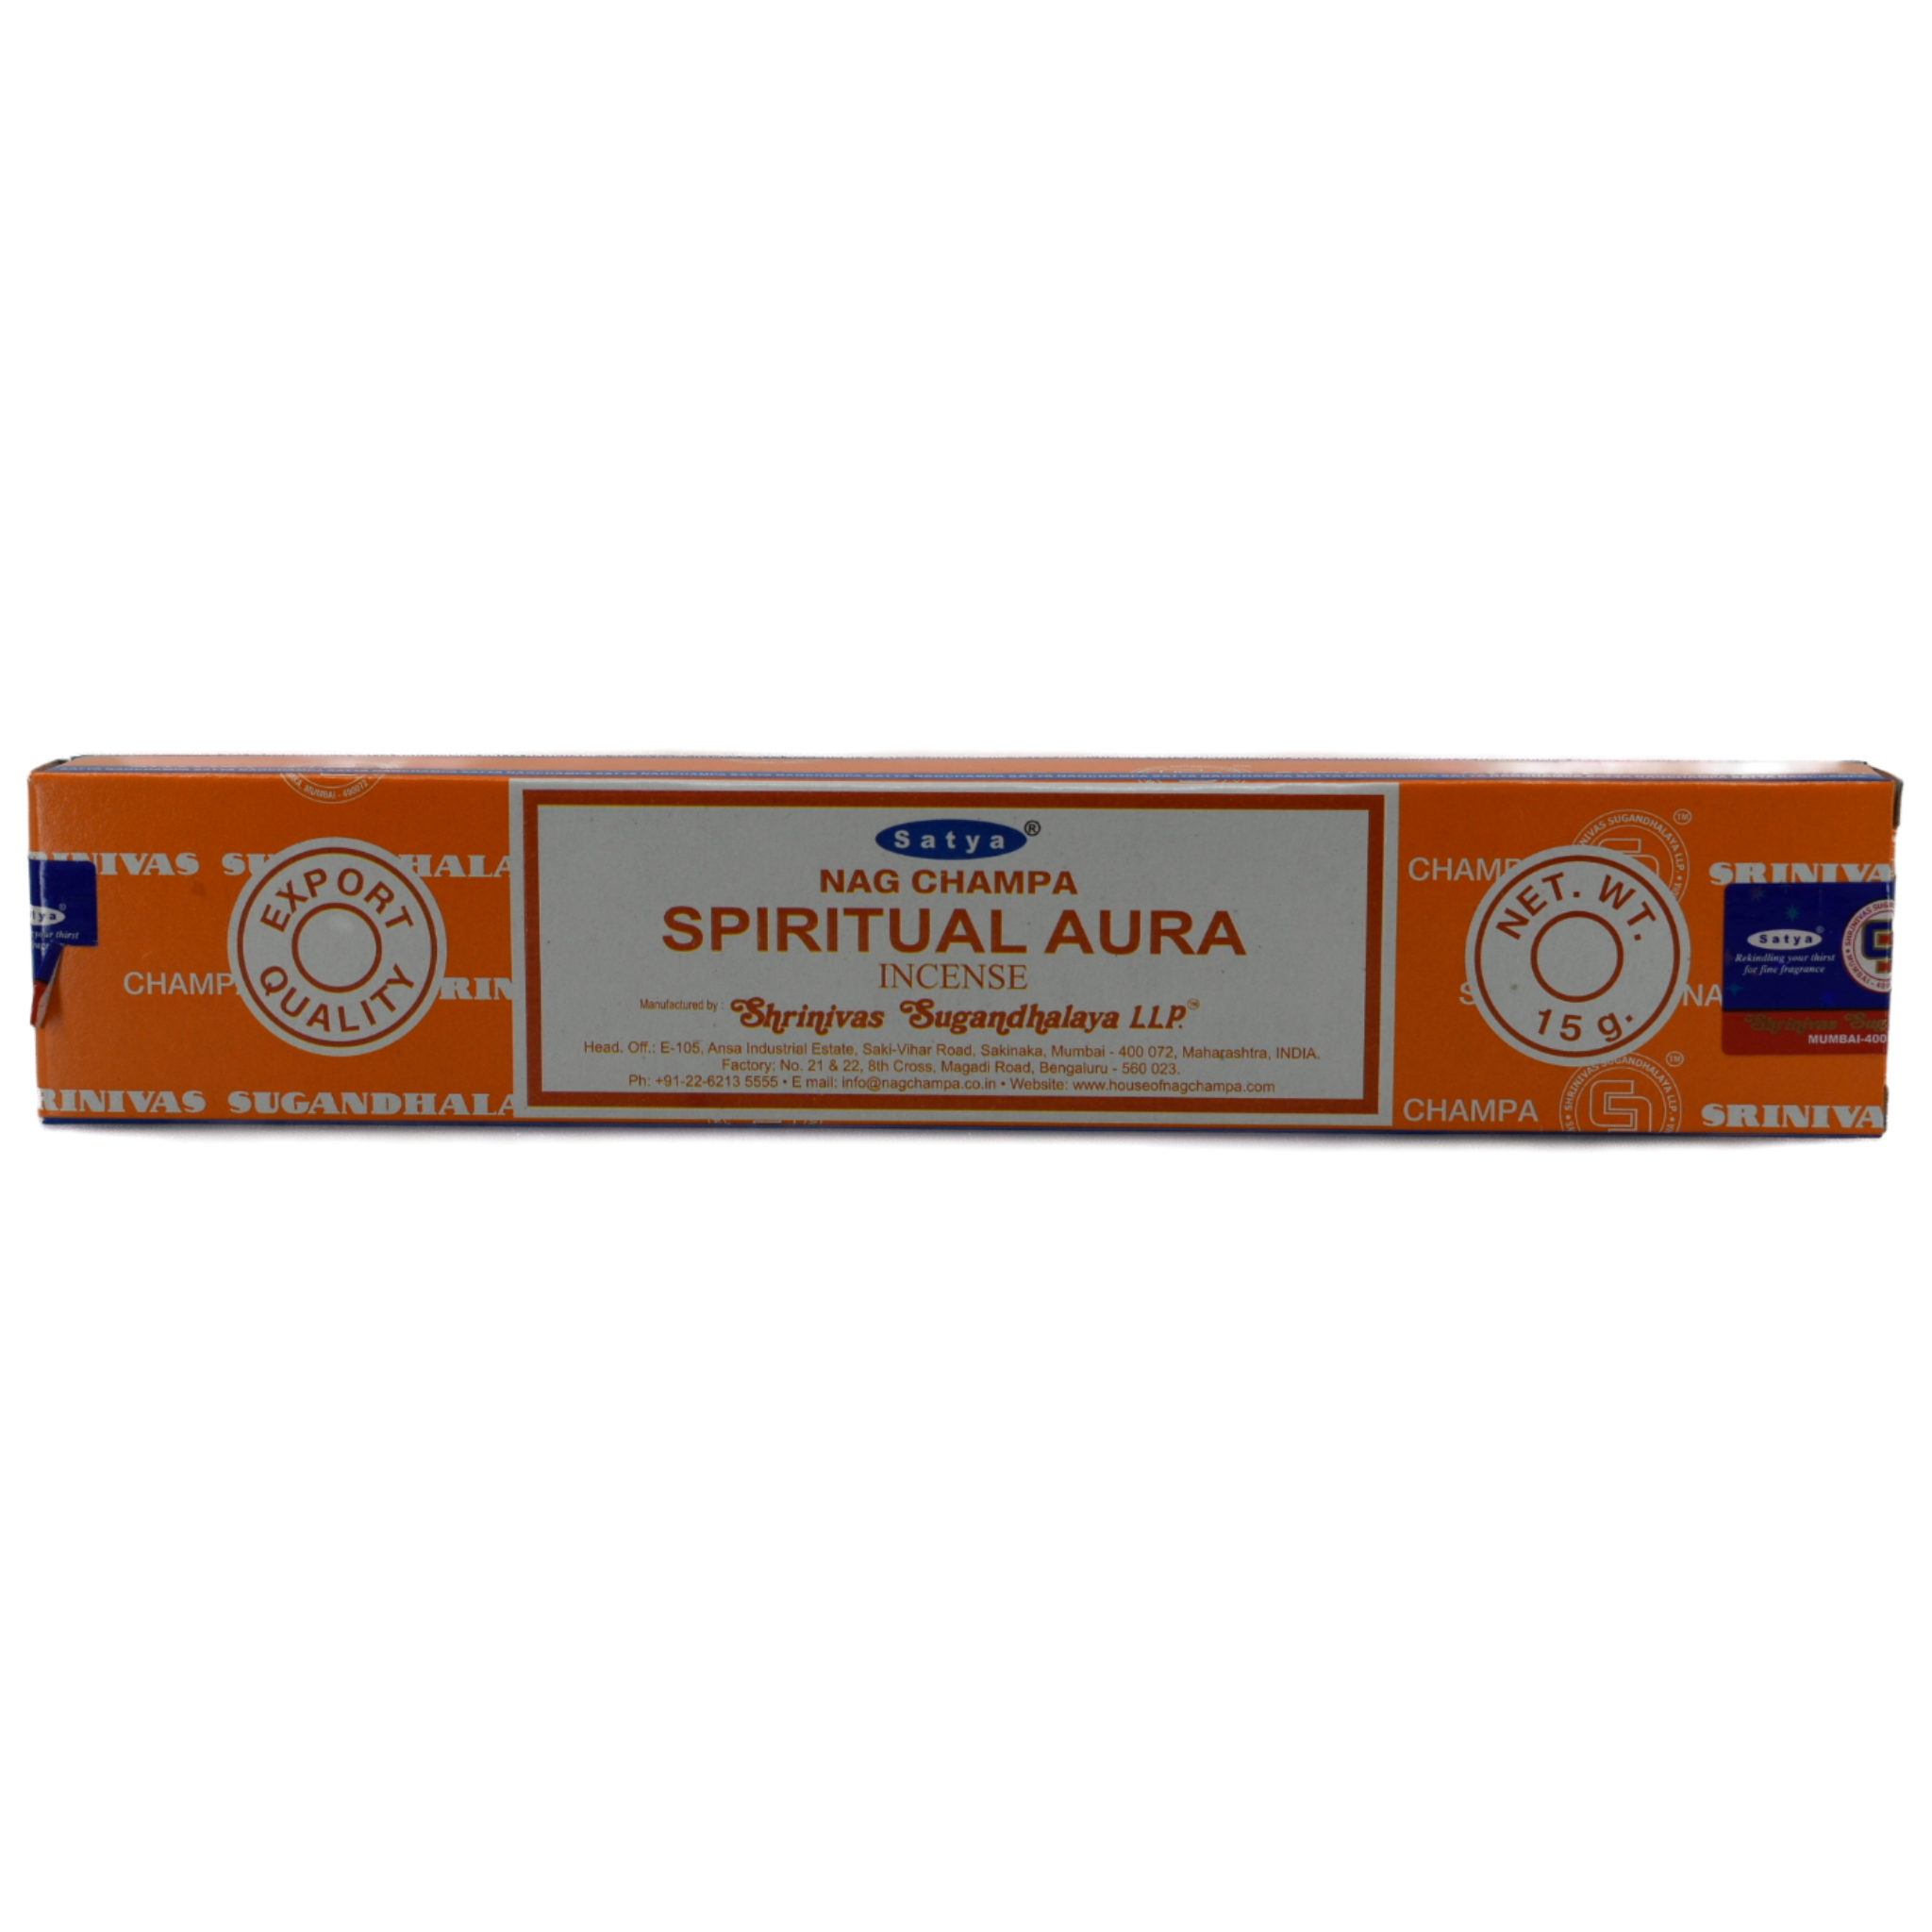 Spiritual Aura 15 gr Incense Sticks.  The cover is orange with lines through it.  The line design are company words.  The center has a white rectangle with a red border within the frame.  The top half of the rectangle lists the company name and title; Sayta Nag Champa Spiritual Aura Incense.  The bottom half lists the manufacturer&